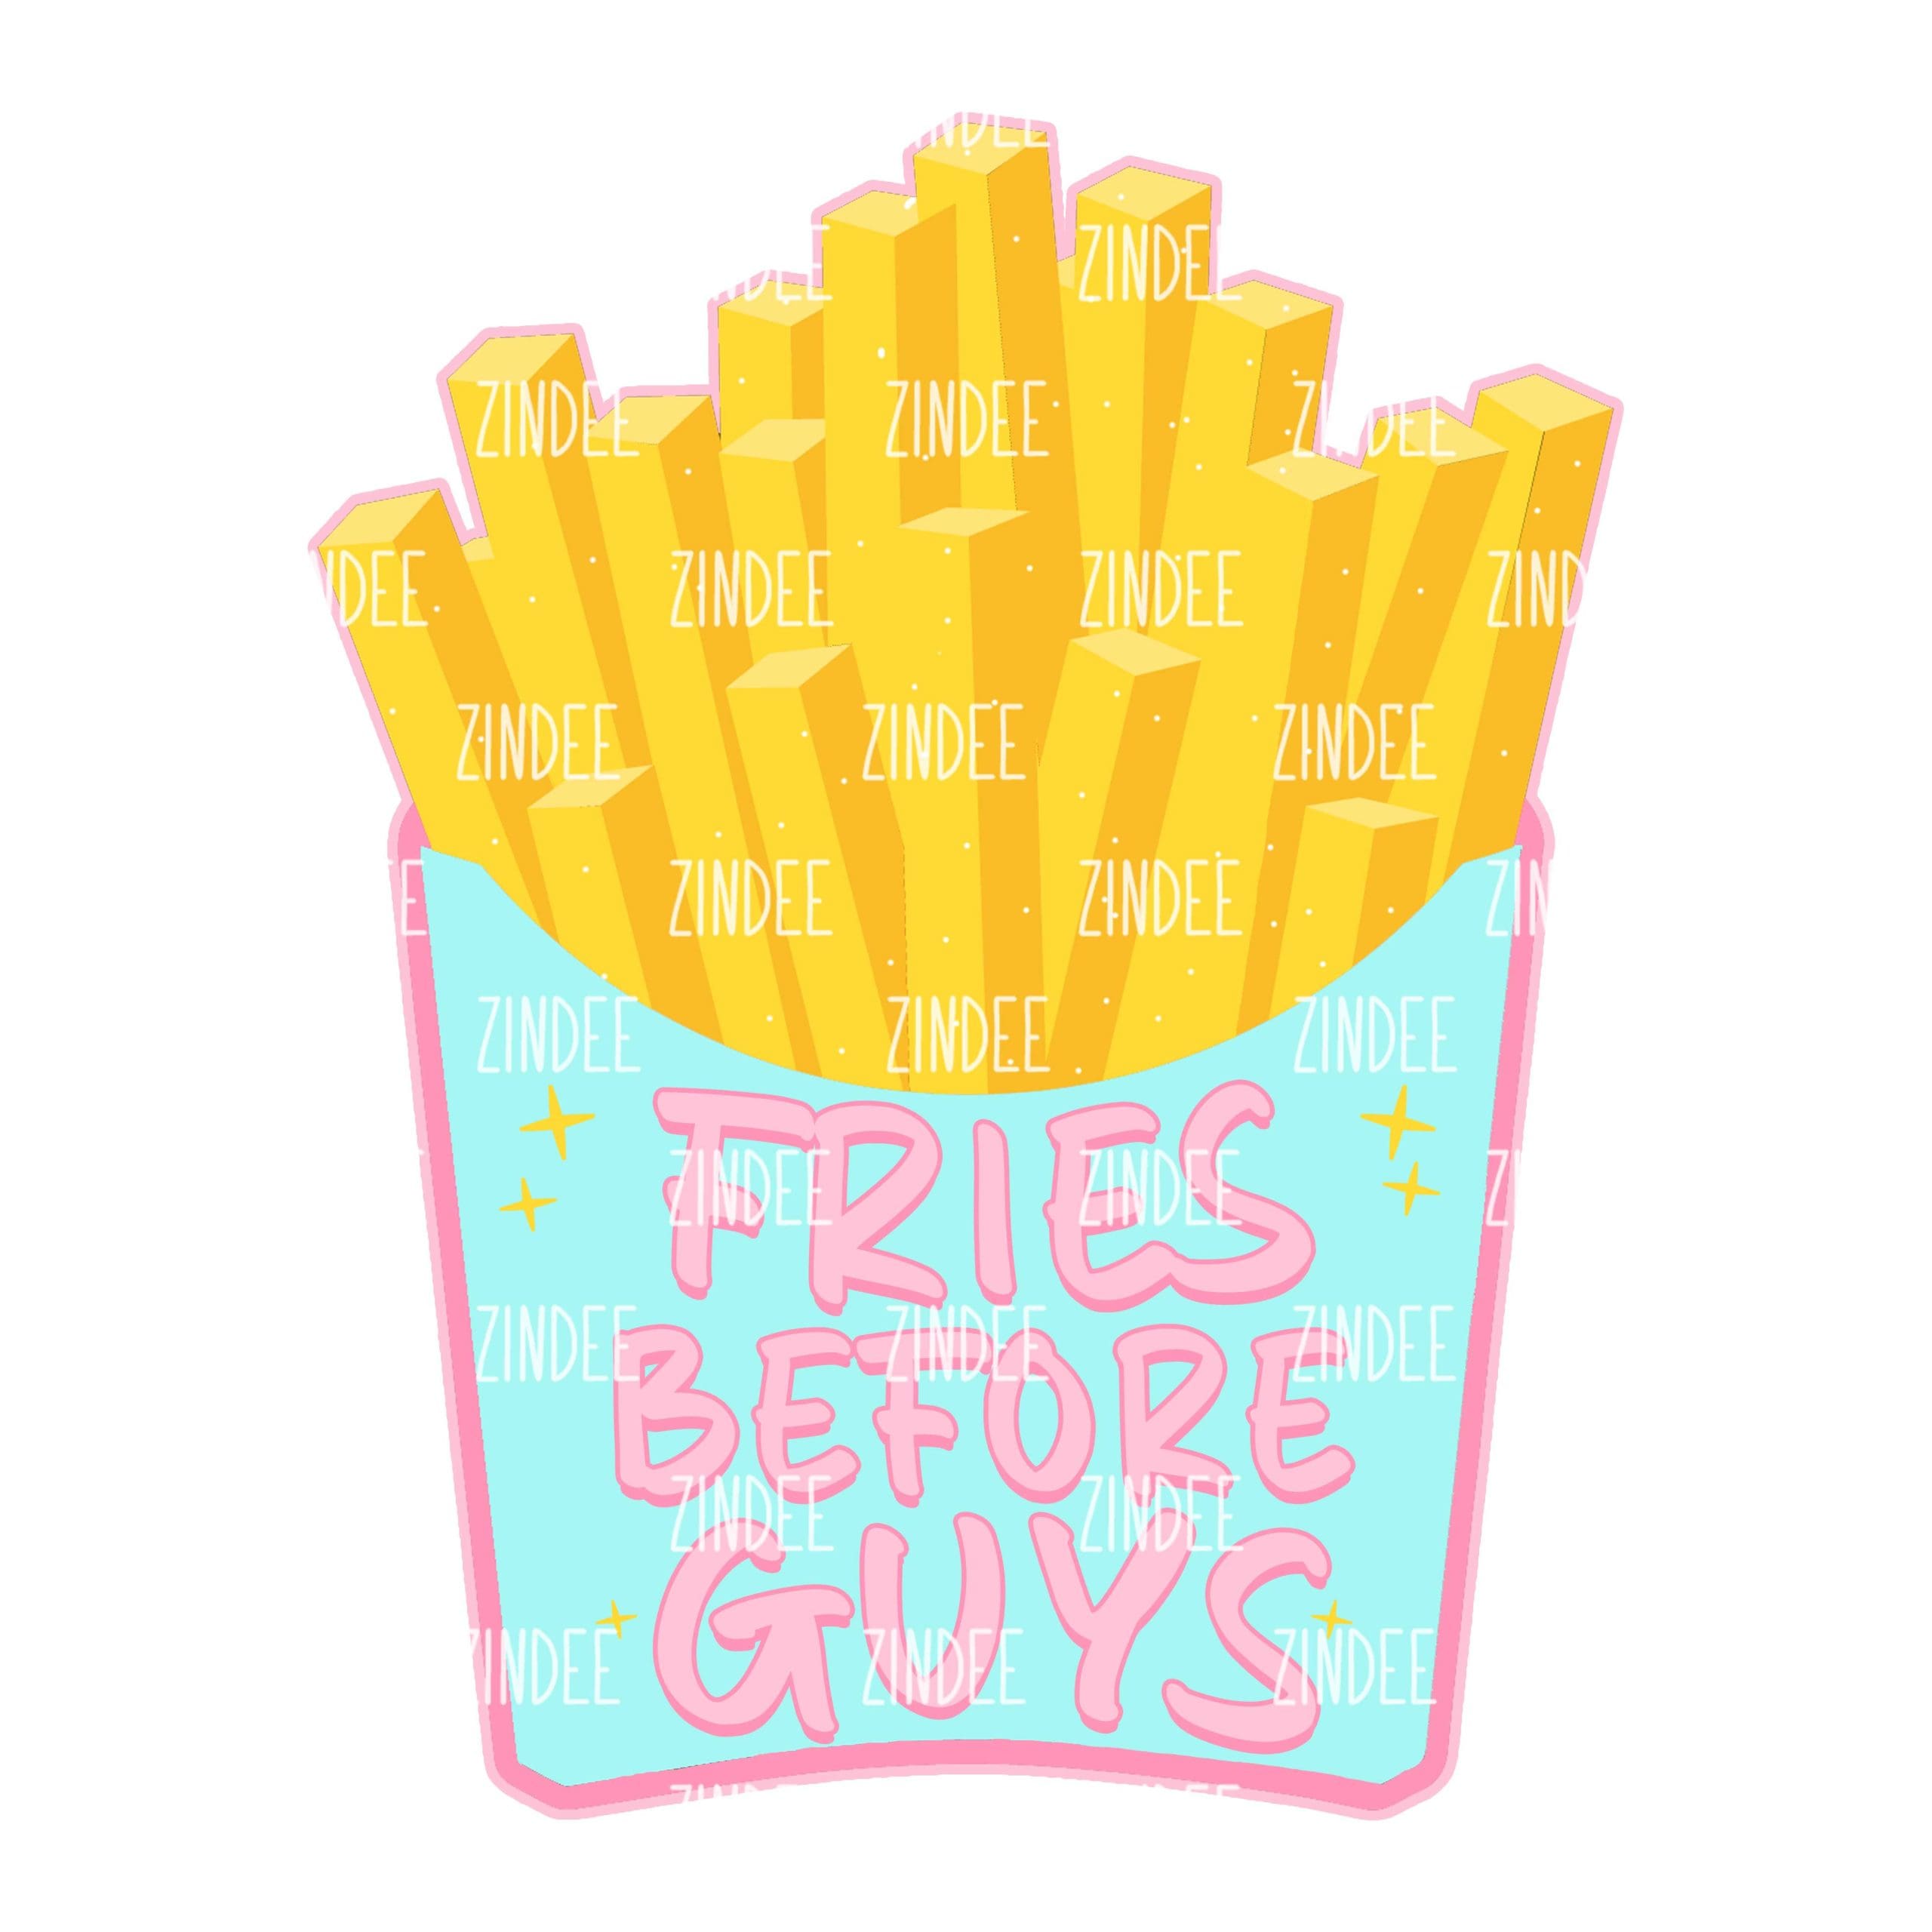 Fries Before Guys PNG instant download Retro Valentine's Day - Inspire  Uplift